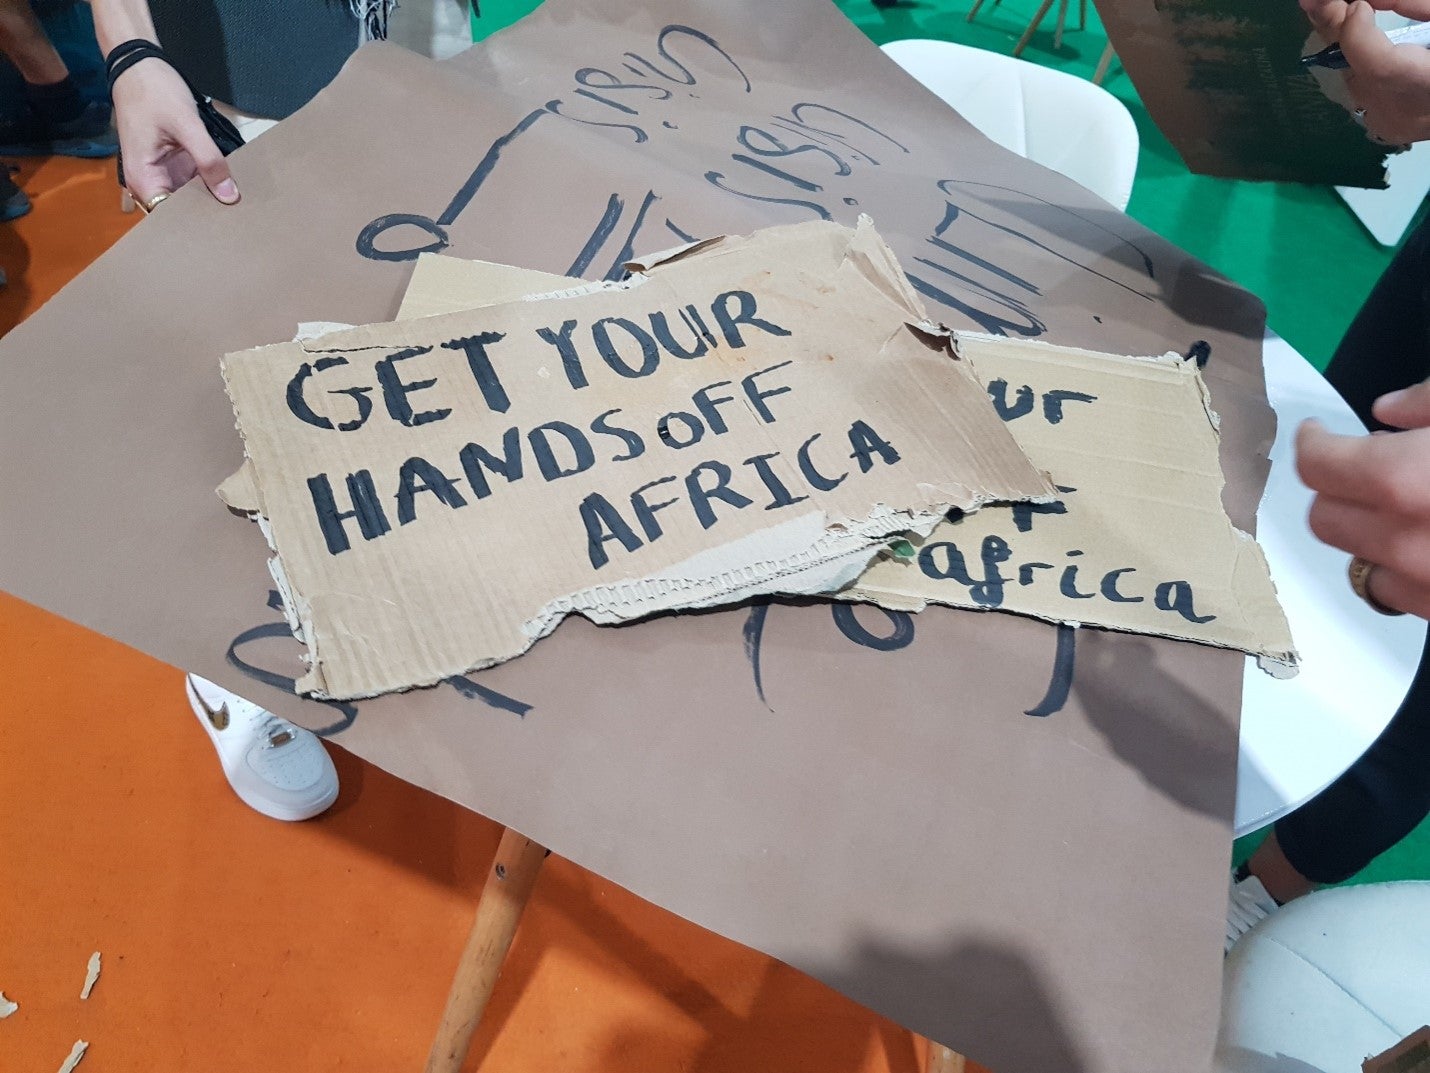 Protest sign that says "get your hands off Africa!"